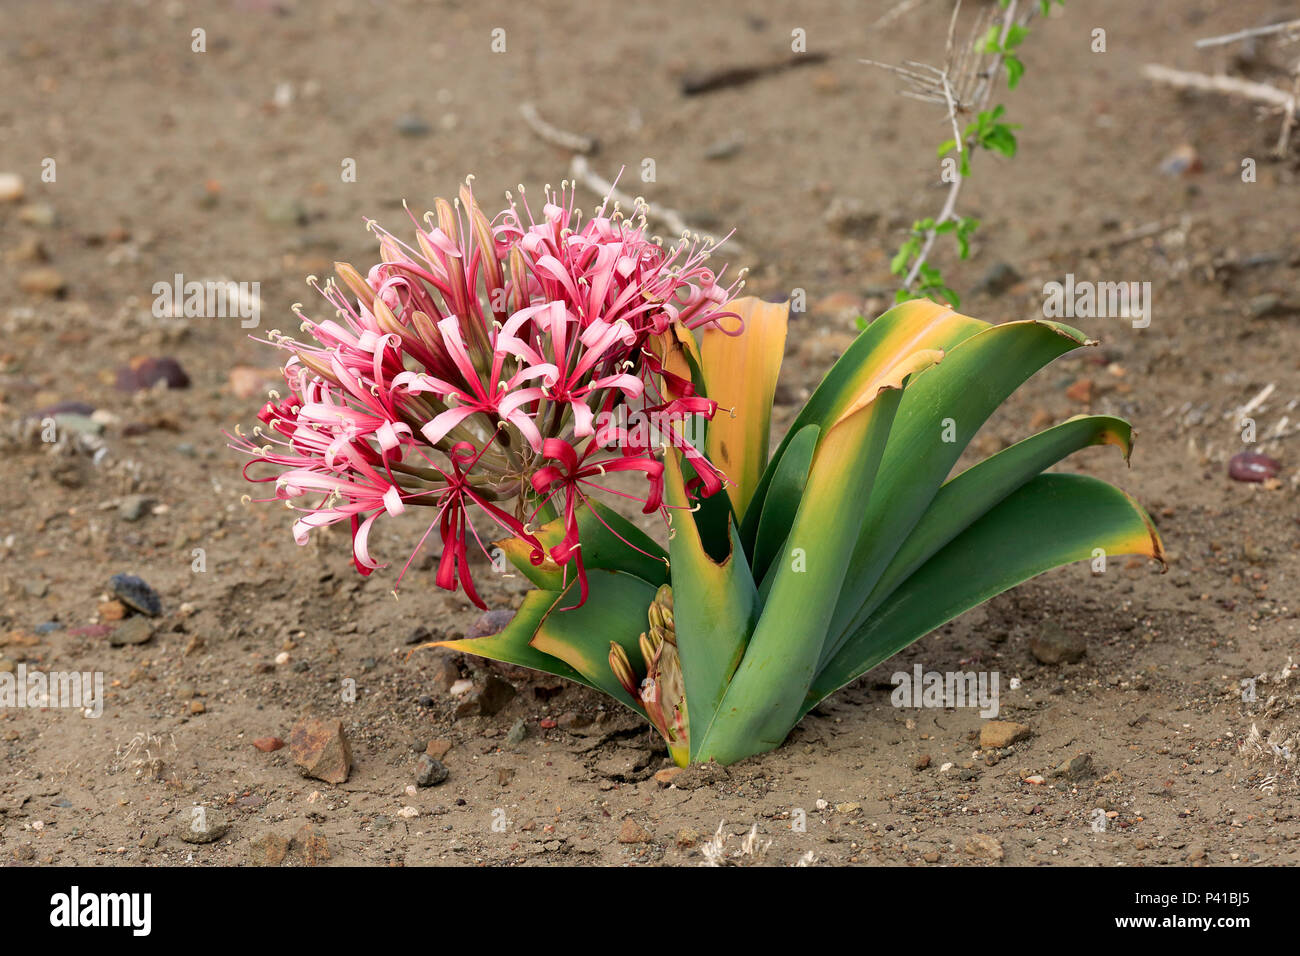 Sand Lily (Crinum buphanoides) blooming, Kruger National Park, South Africa Stock Photo